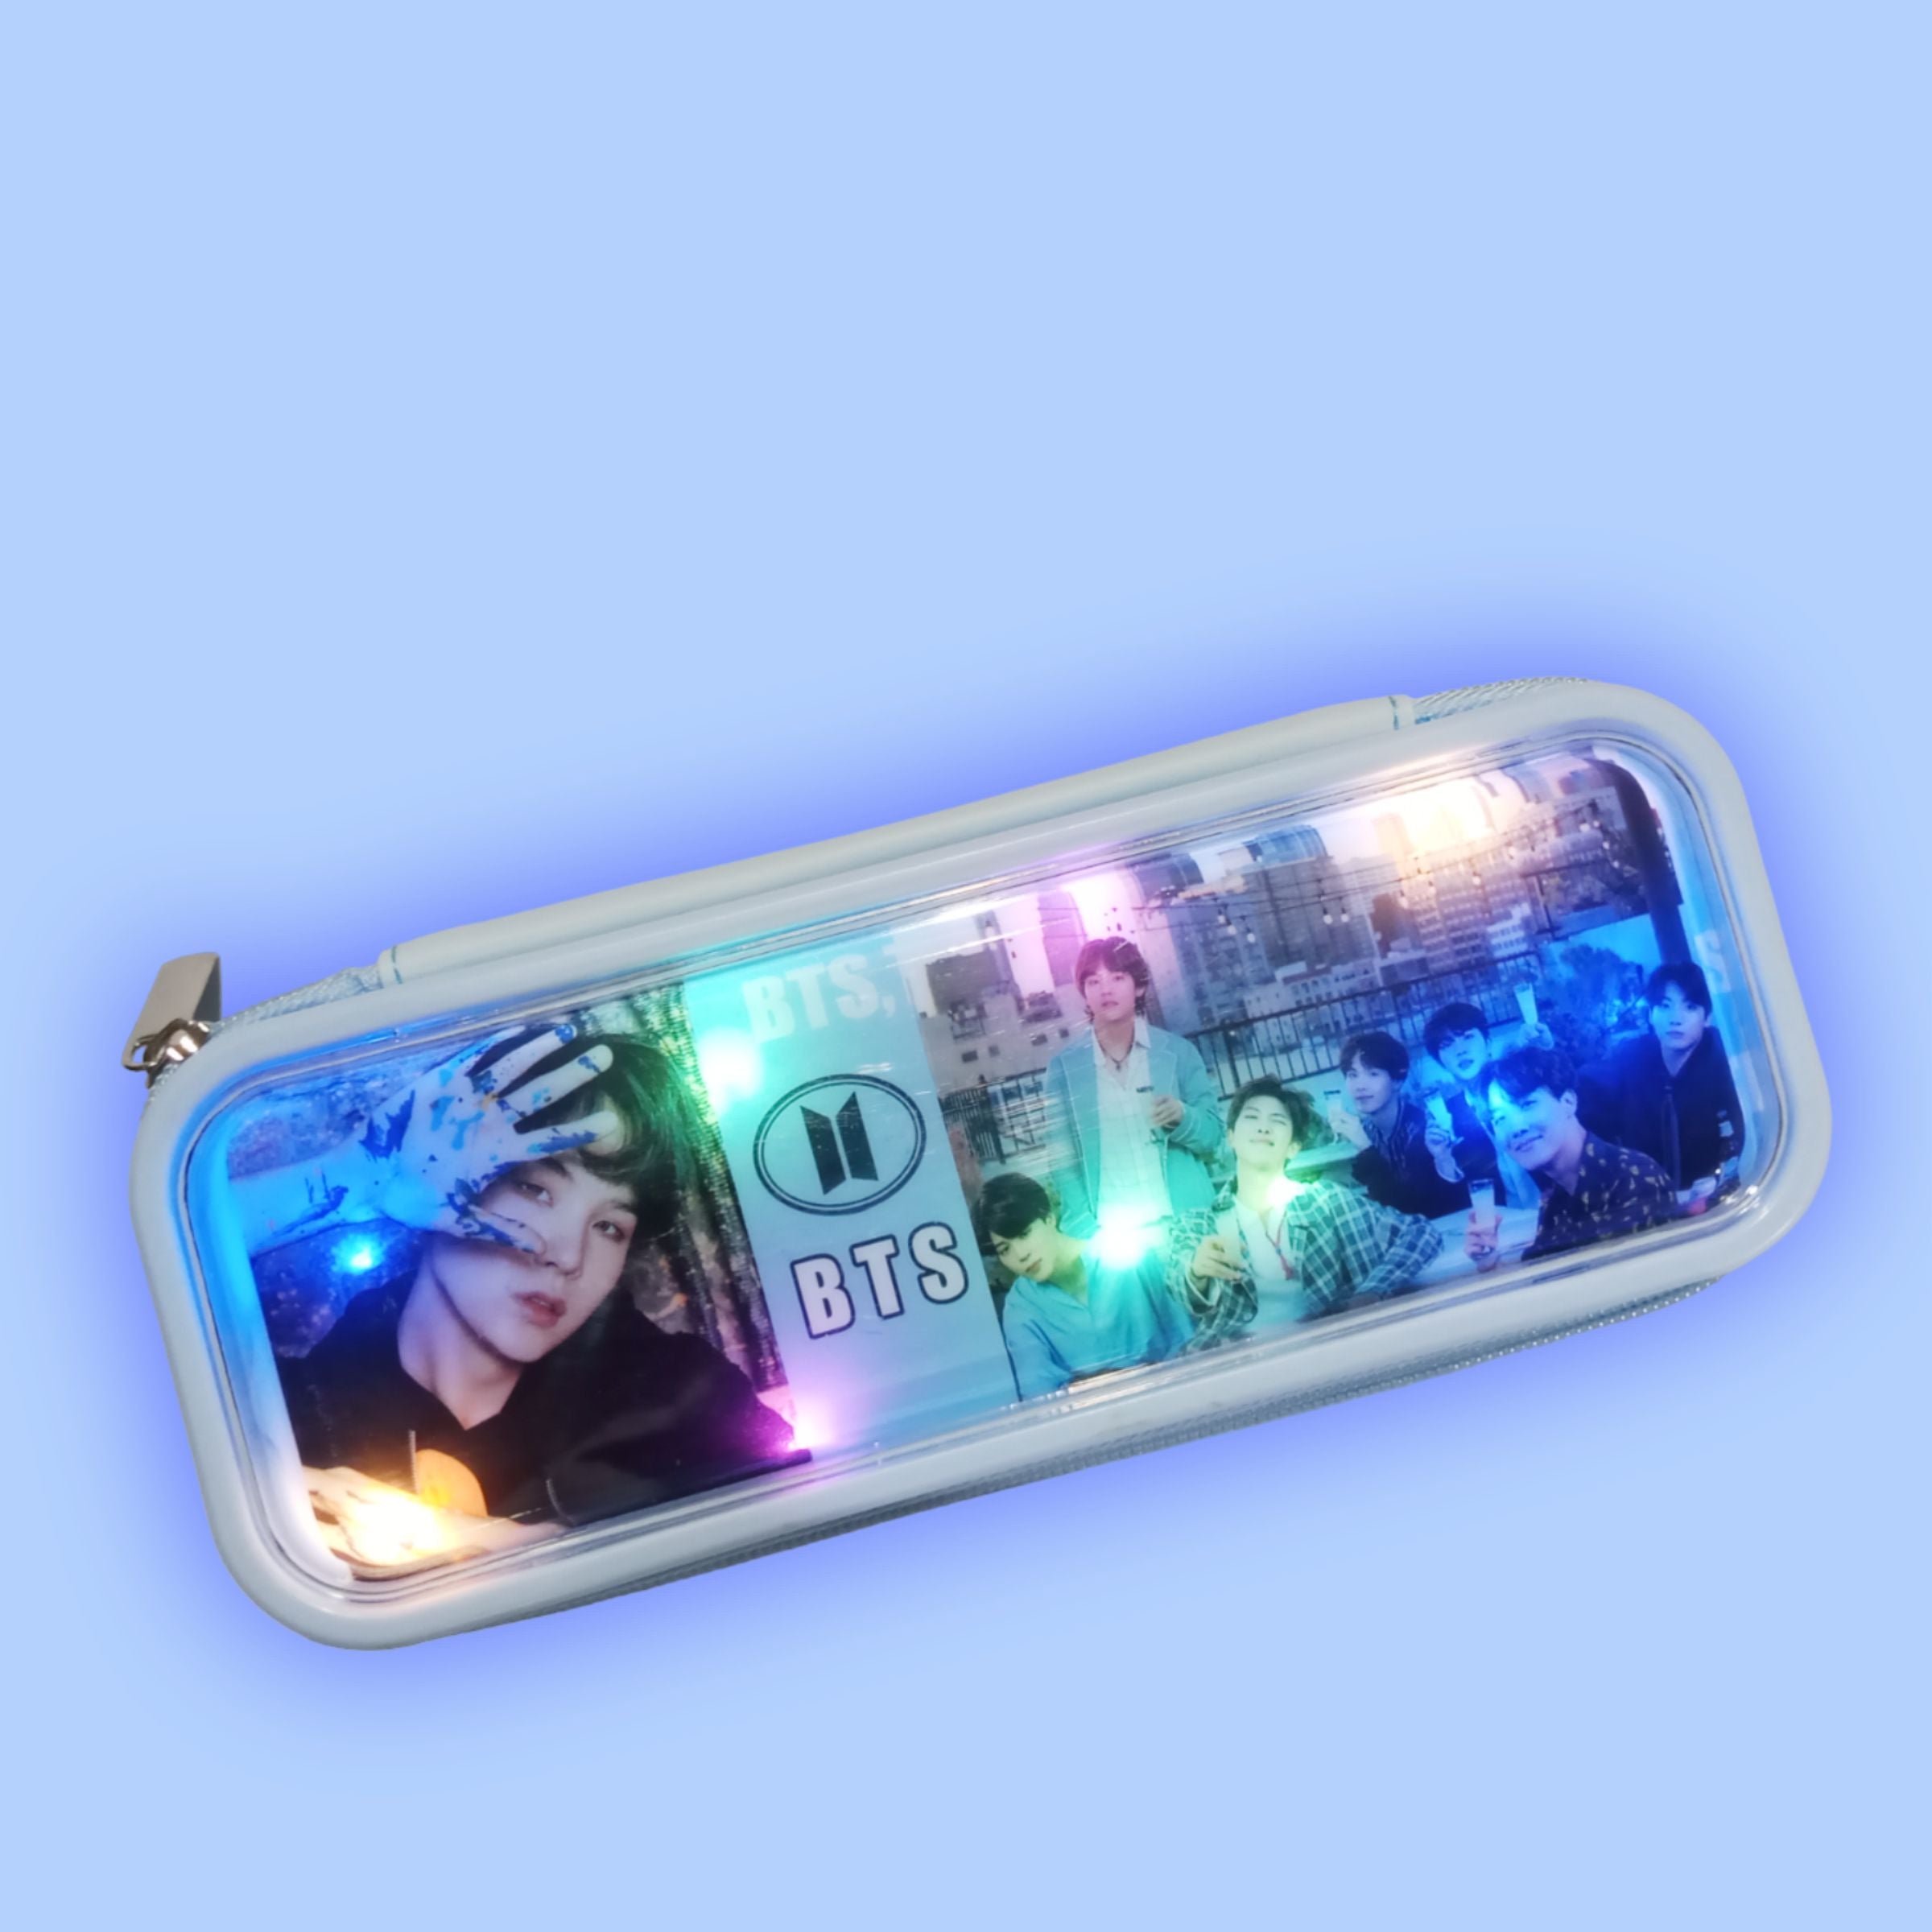 BTS Blue Pencil Pouch With Colorful LED Lights